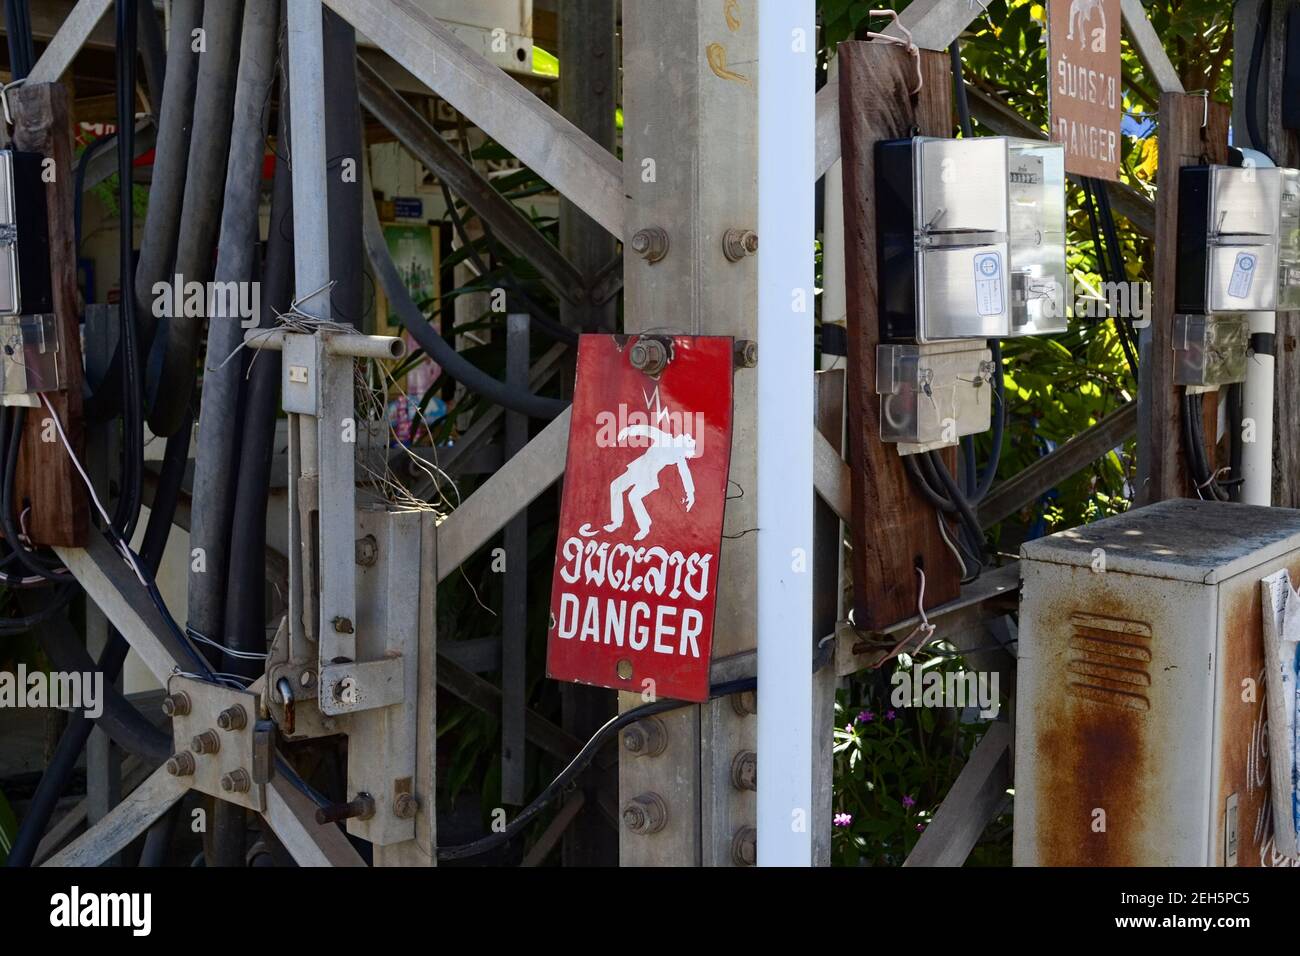 High voltage danger sign in Laos Stock Photo